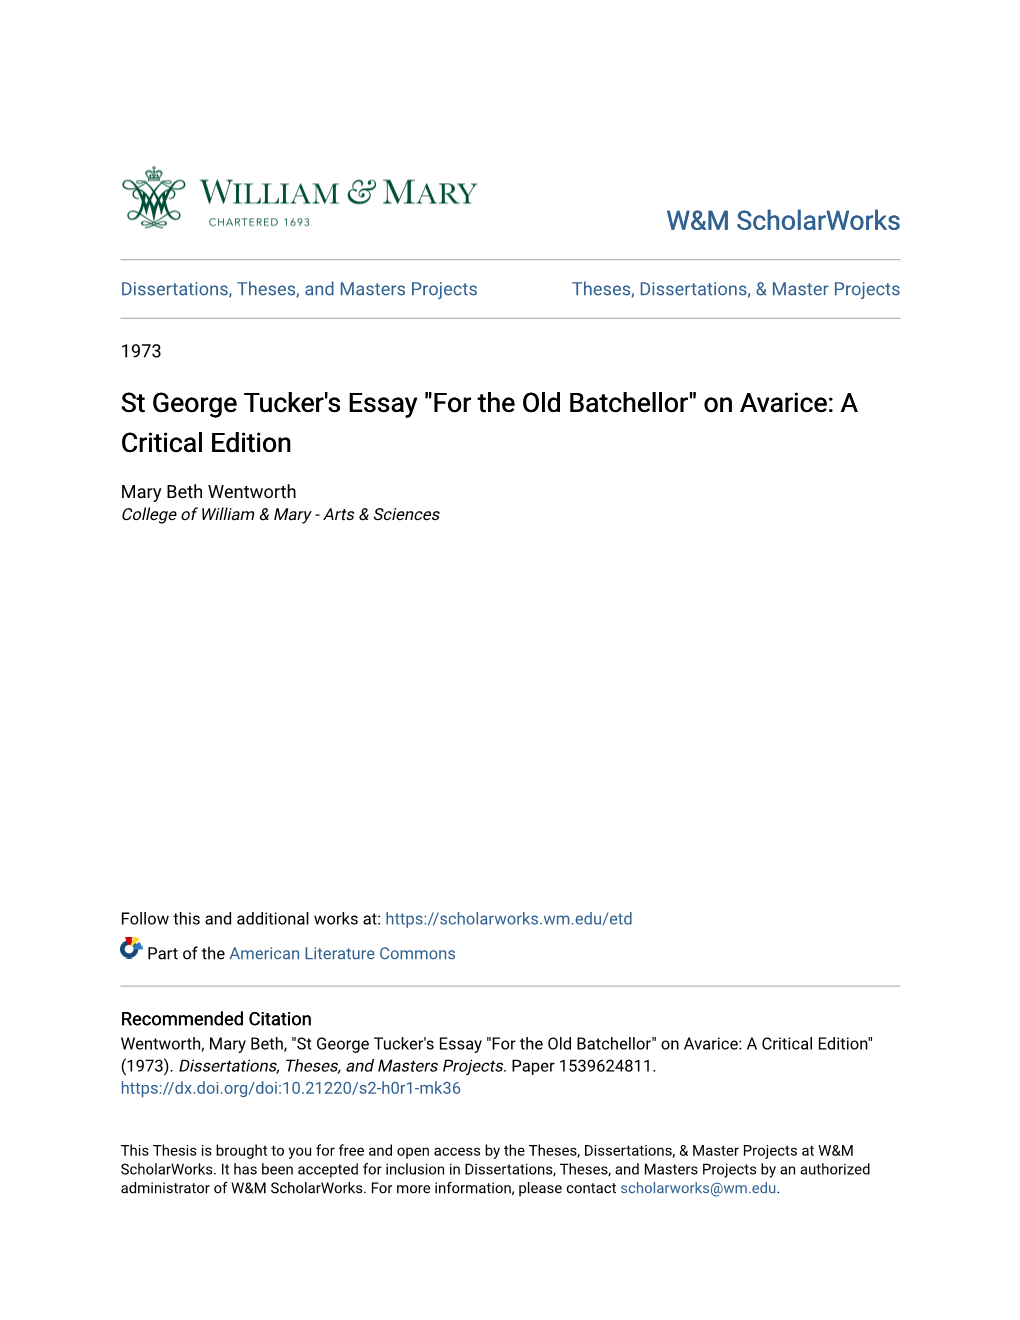 St George Tucker's Essay "For the Old Batchellor" on Avarice: a Critical Edition